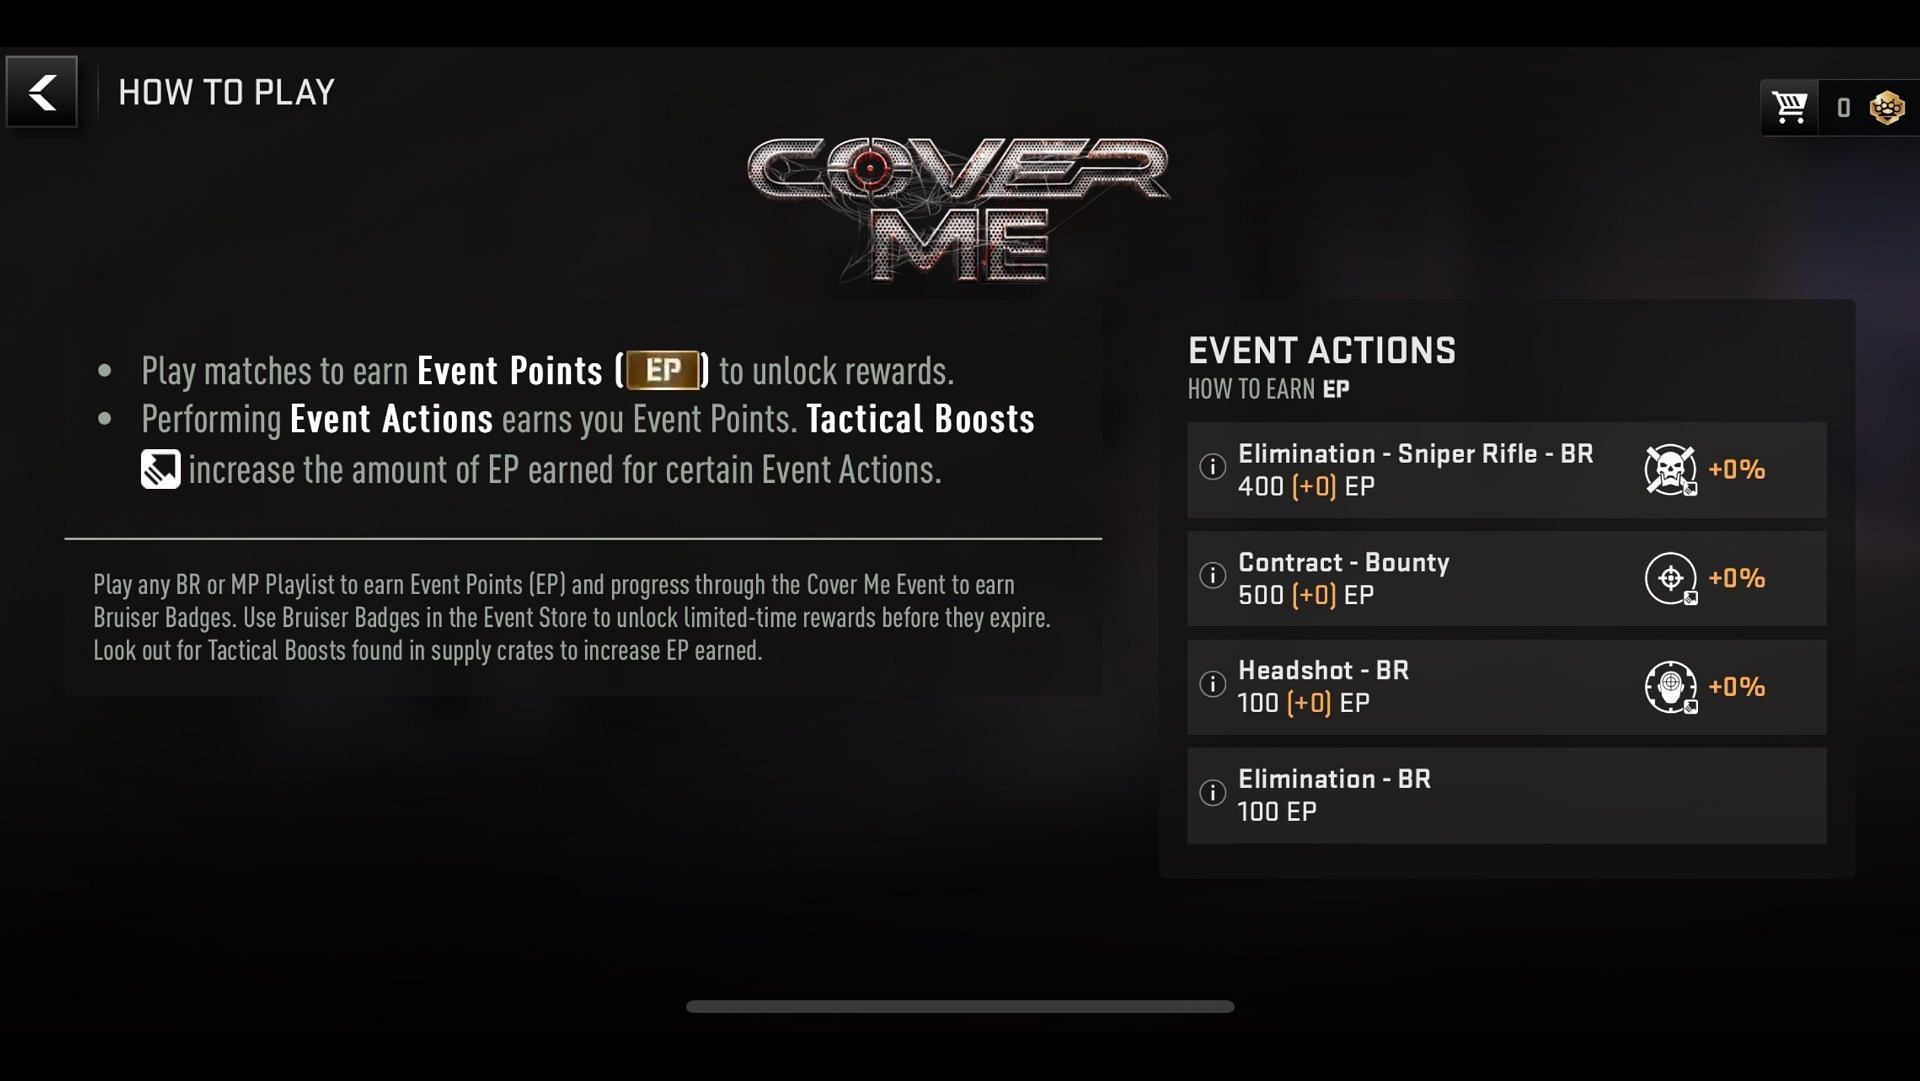 How to earn Event Points (Image via Activision)